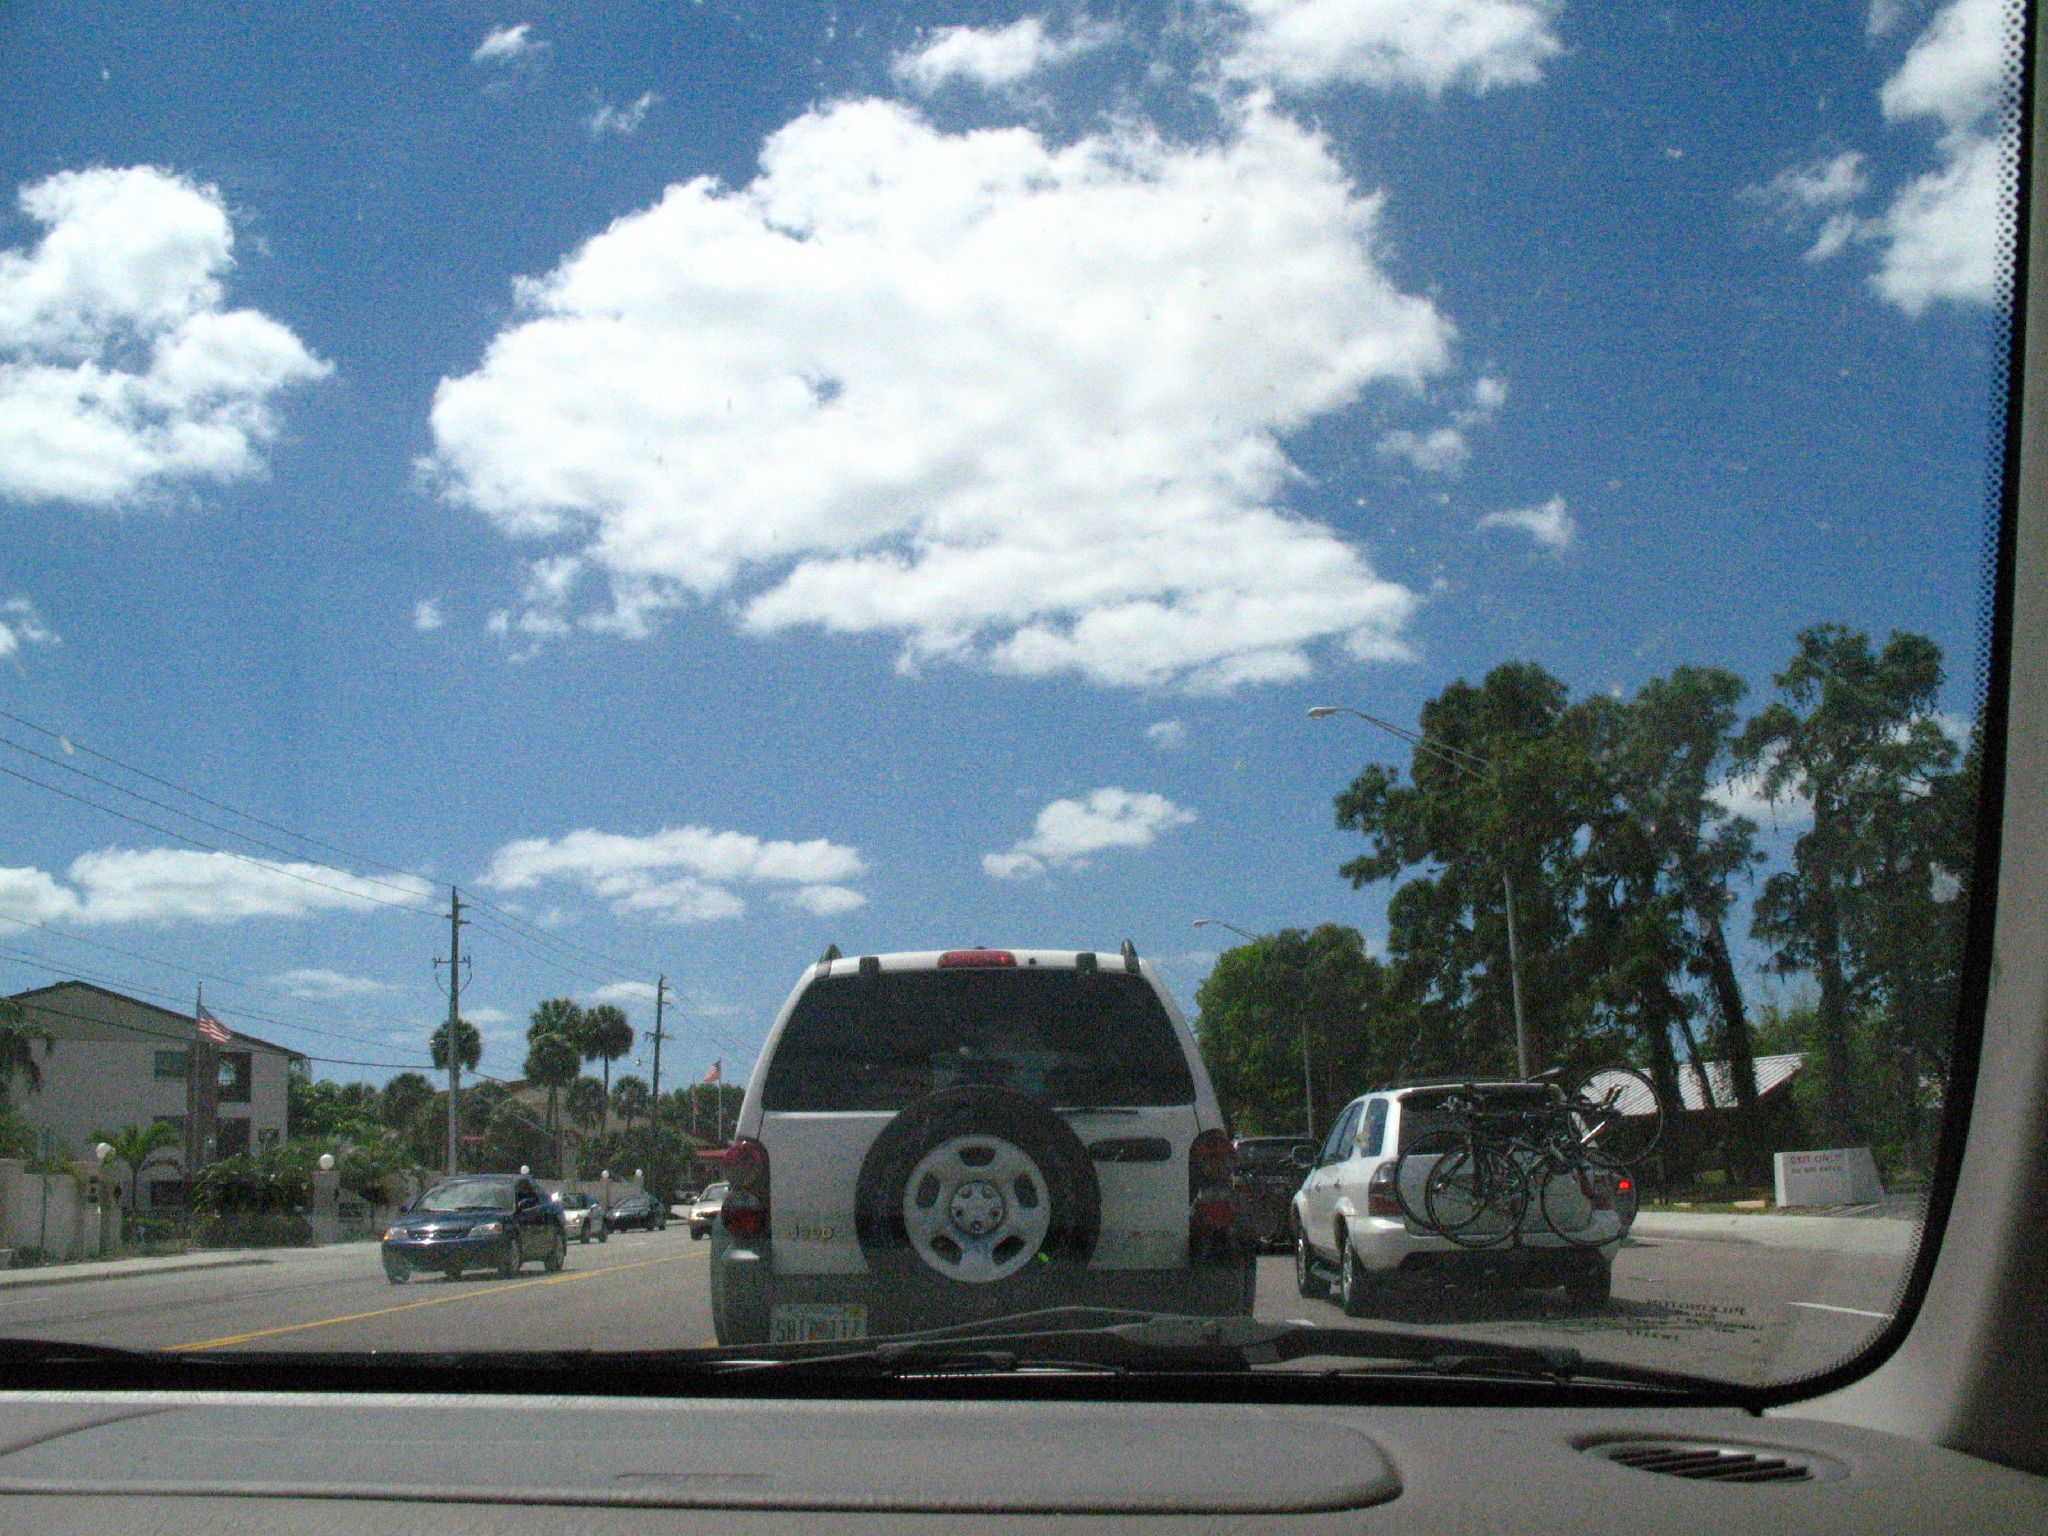 view from the backseat of a moving vehicle, driving through an intersection